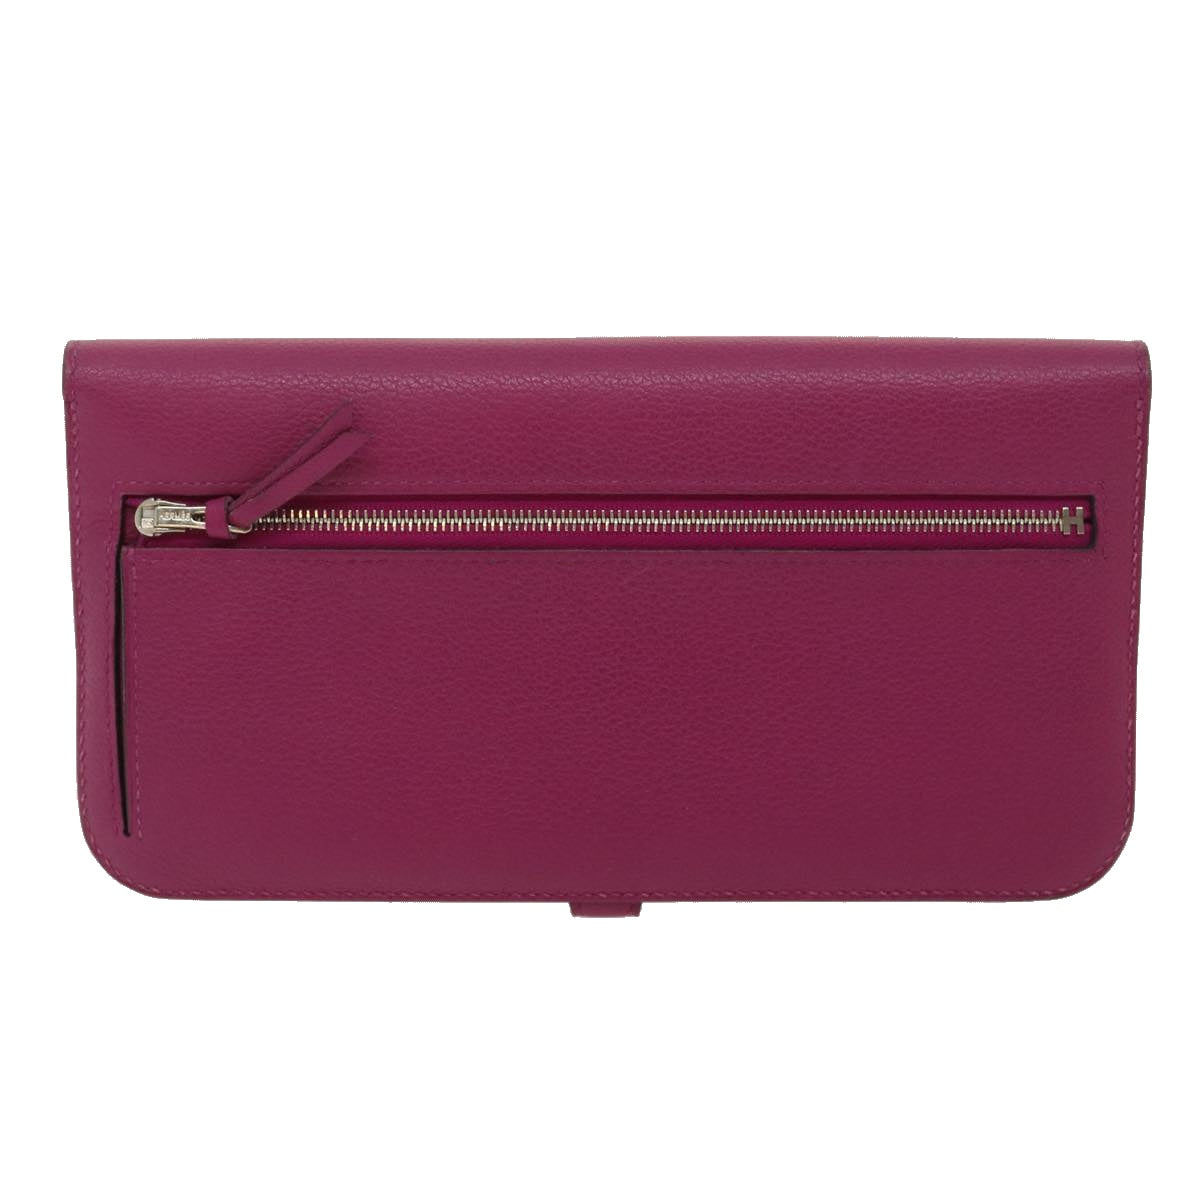 HERMES Dogon Wallet Leather Wine Red Auth ar6841 - 0